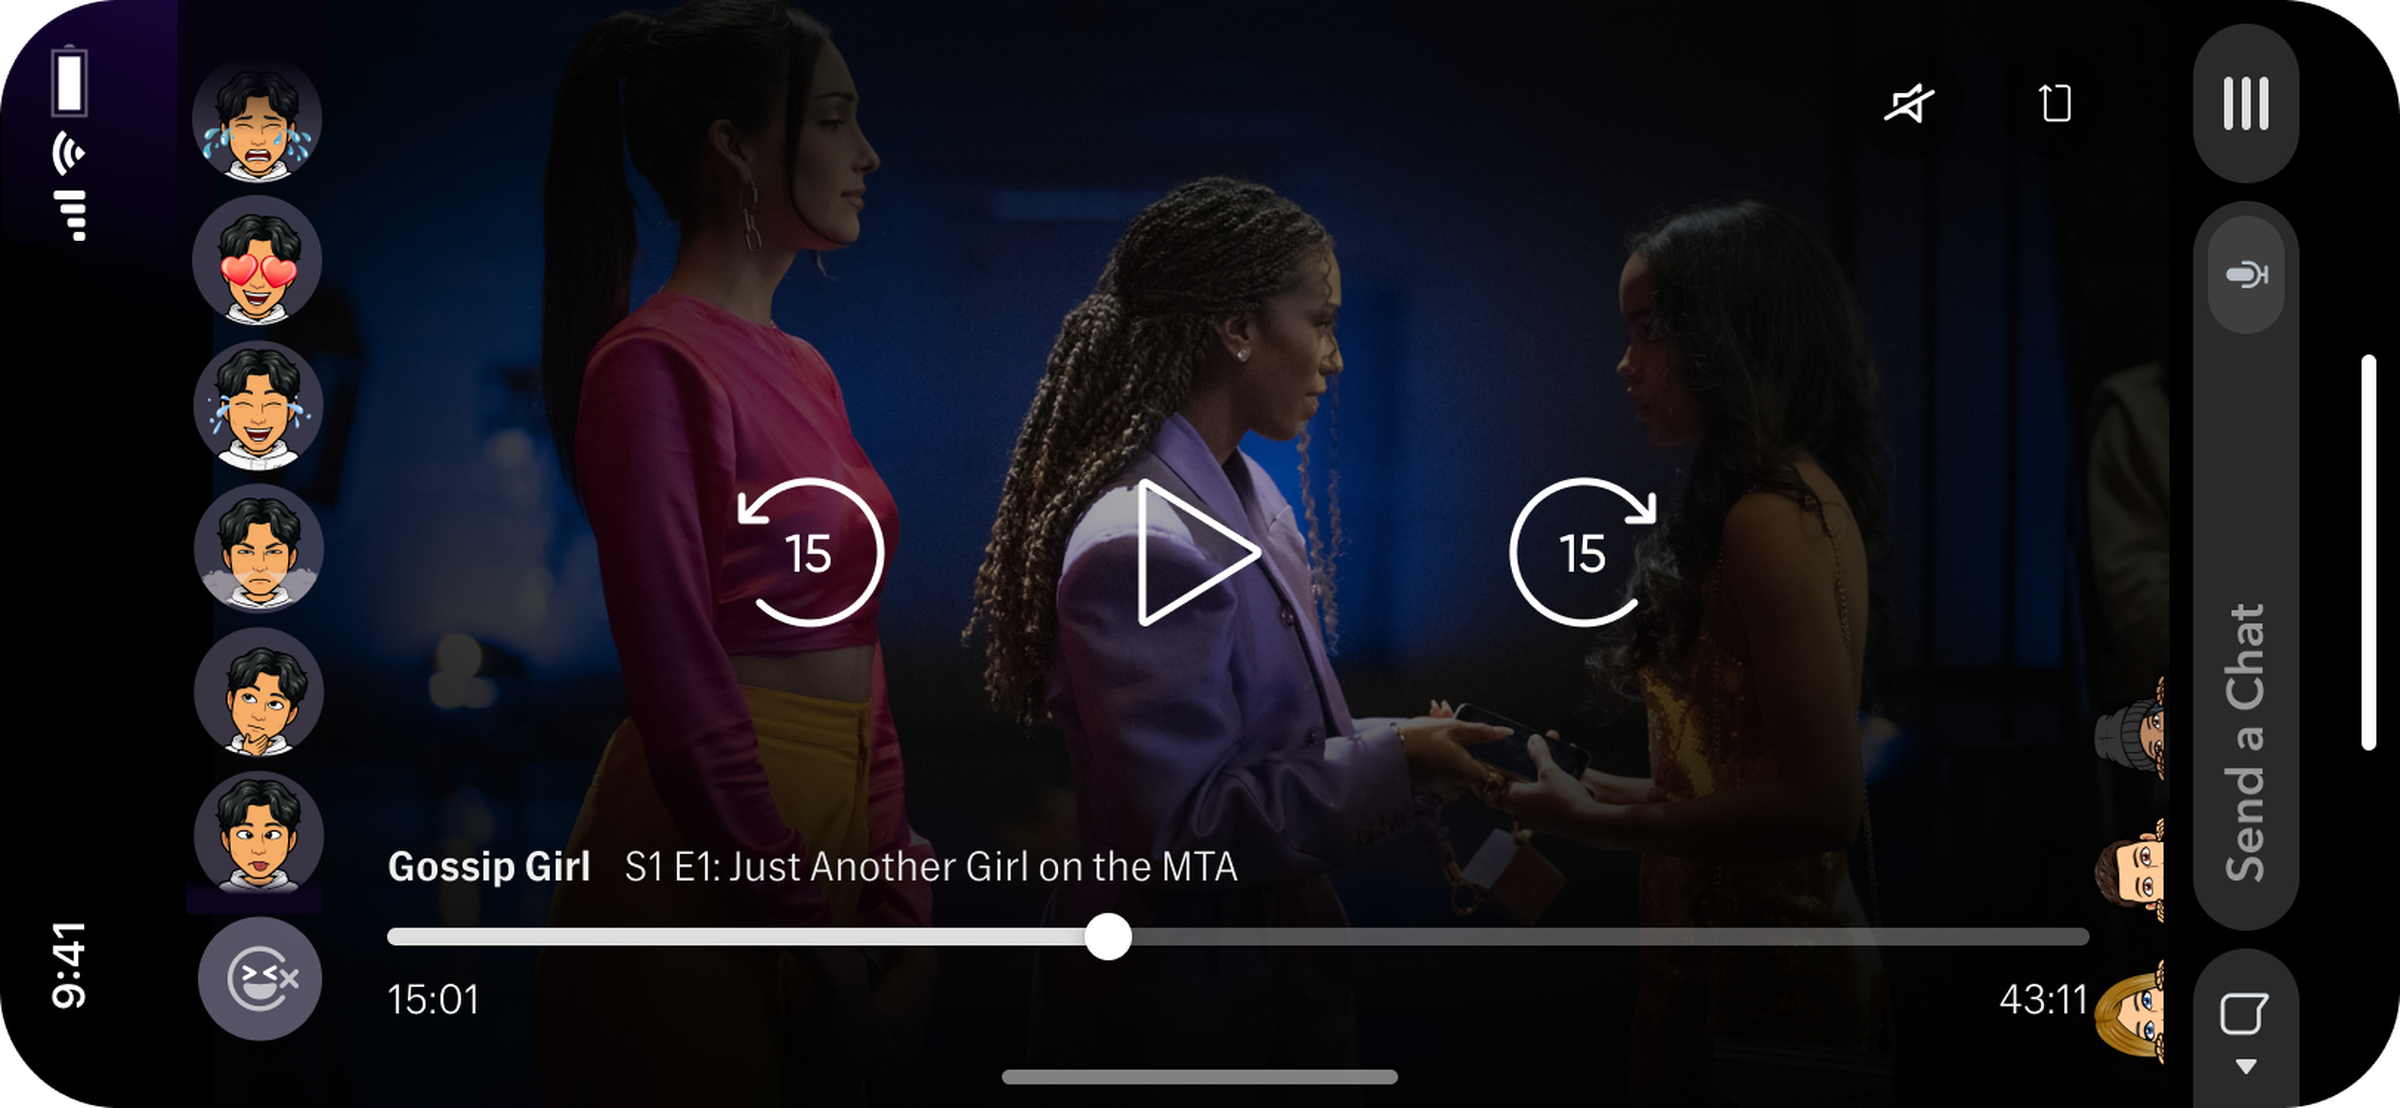 In-app streaming with HBO Max Minis.